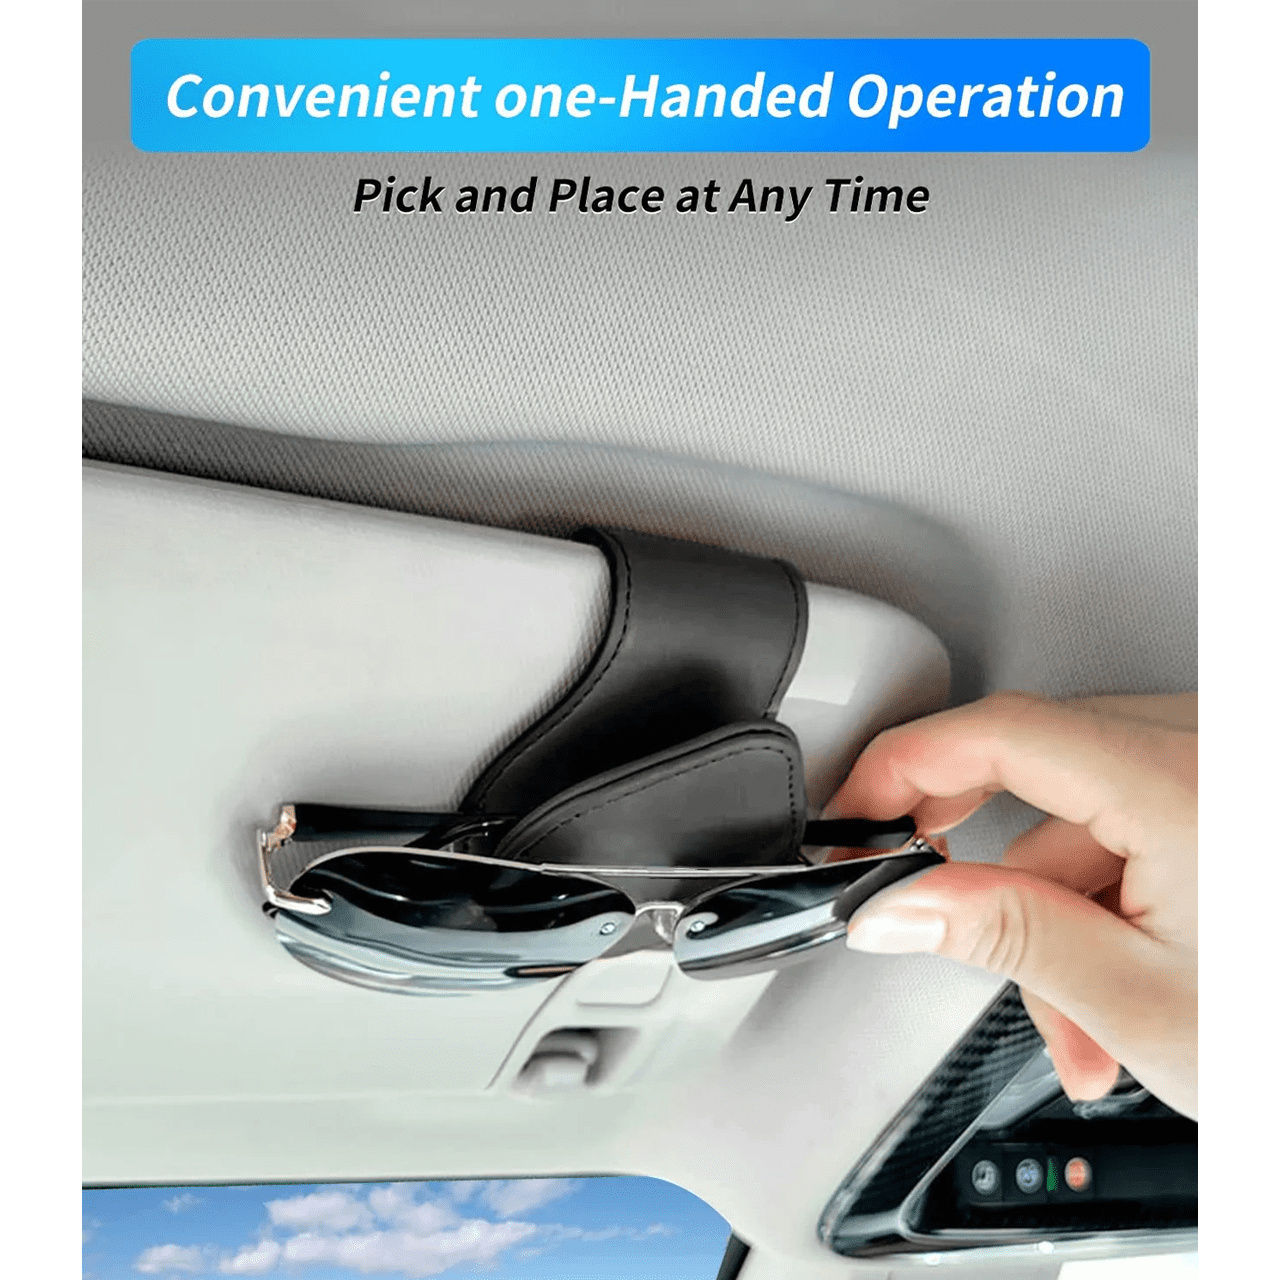 Custom Text and Logo Sunglasses Holder for Car Visor Clips, Fit with all car, Leather Magnet Adsorption Visor Accessories Car Organizer for Storing Glasses Tickets Eyeglasses Hanger